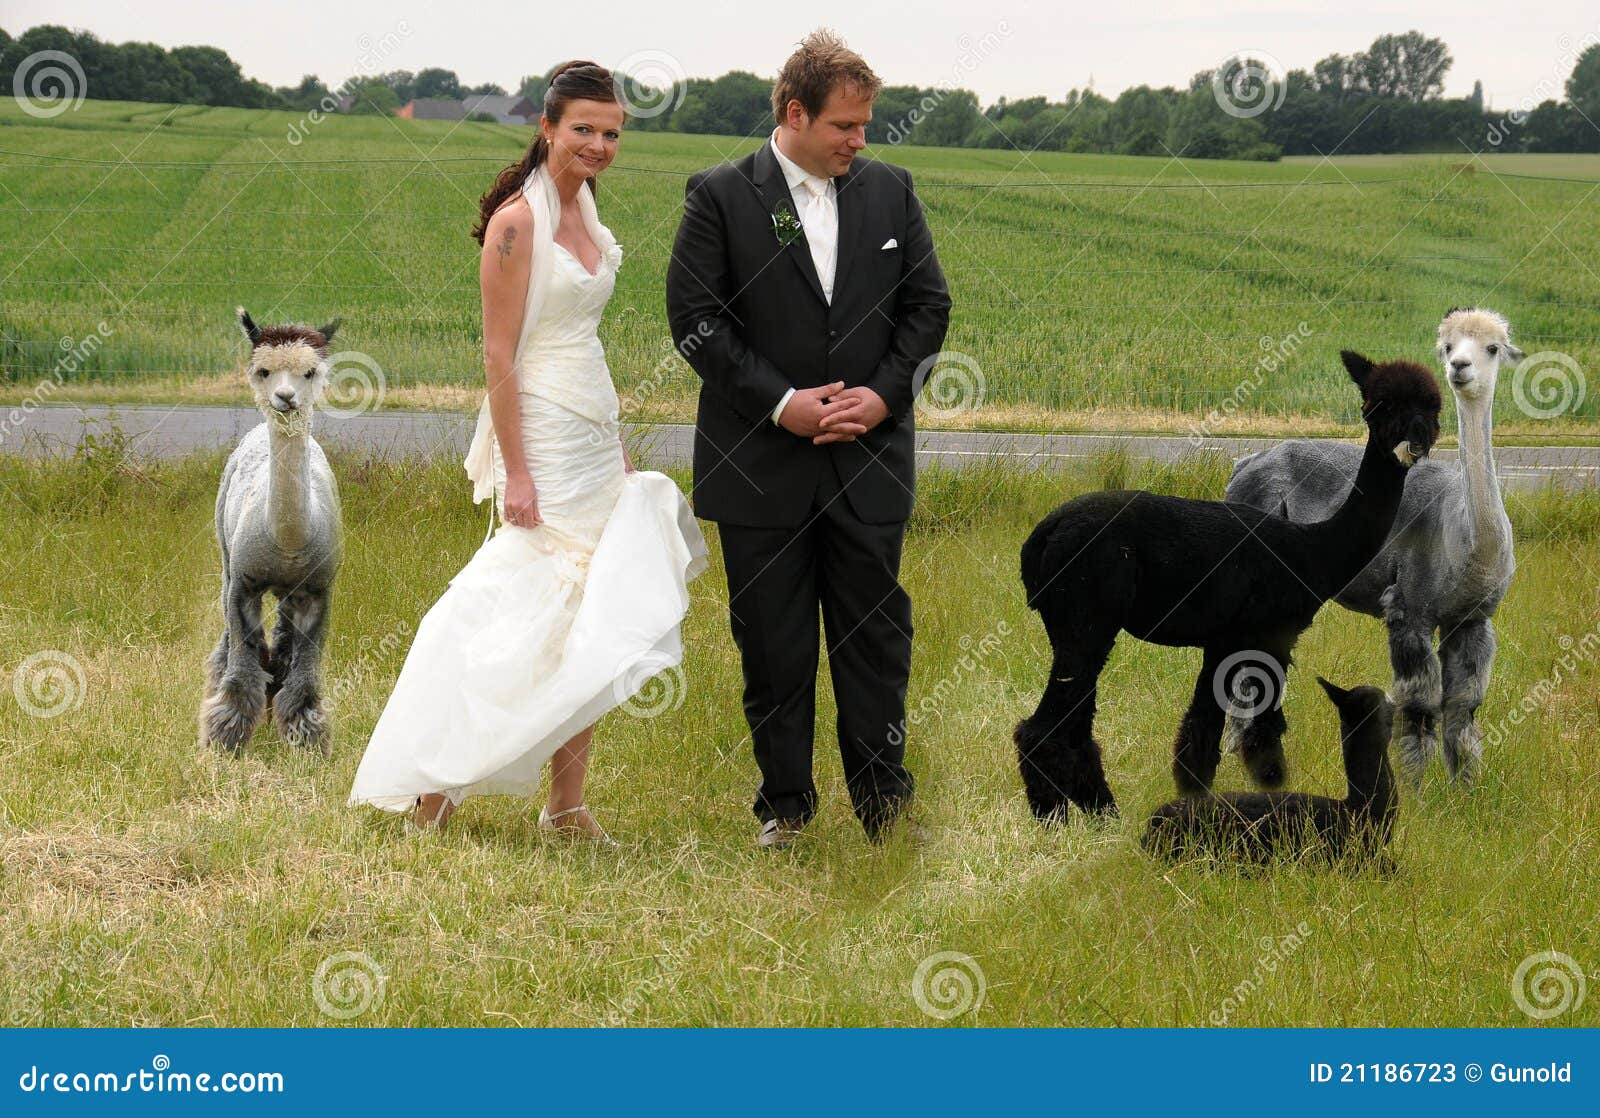 Couple with alpacas. Couple in the field with young alpacas